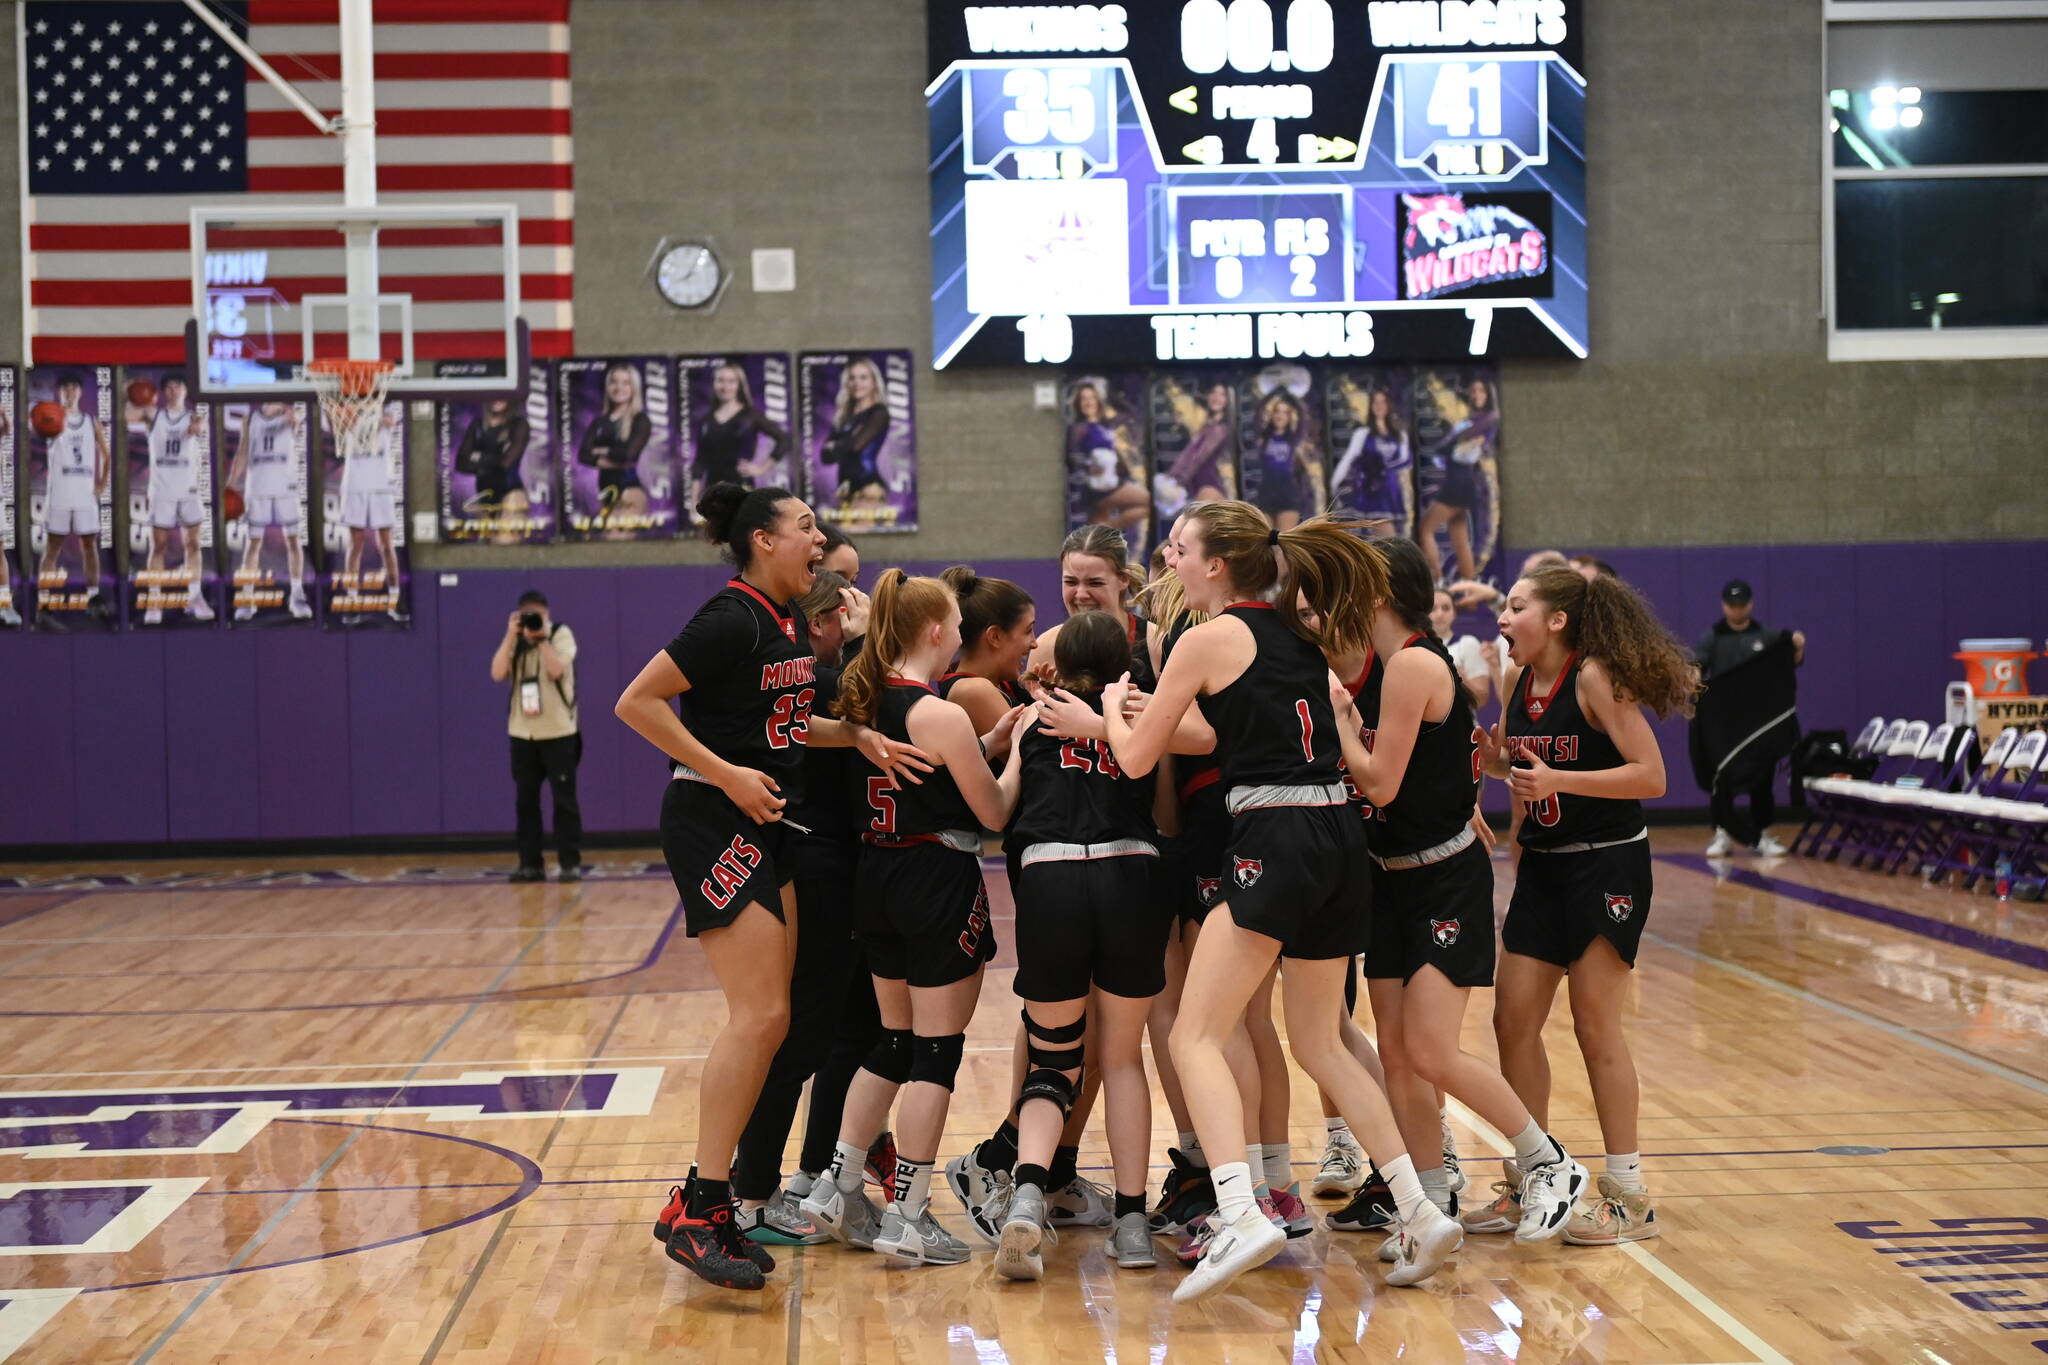 The Mount Si Girls basketball team celebrate after victory over Lake Stevens on Feb. 16 sends them to the state tournament. It will be their first appearance at state in nearly 30 years. Photo courtesy of Calder Productions.